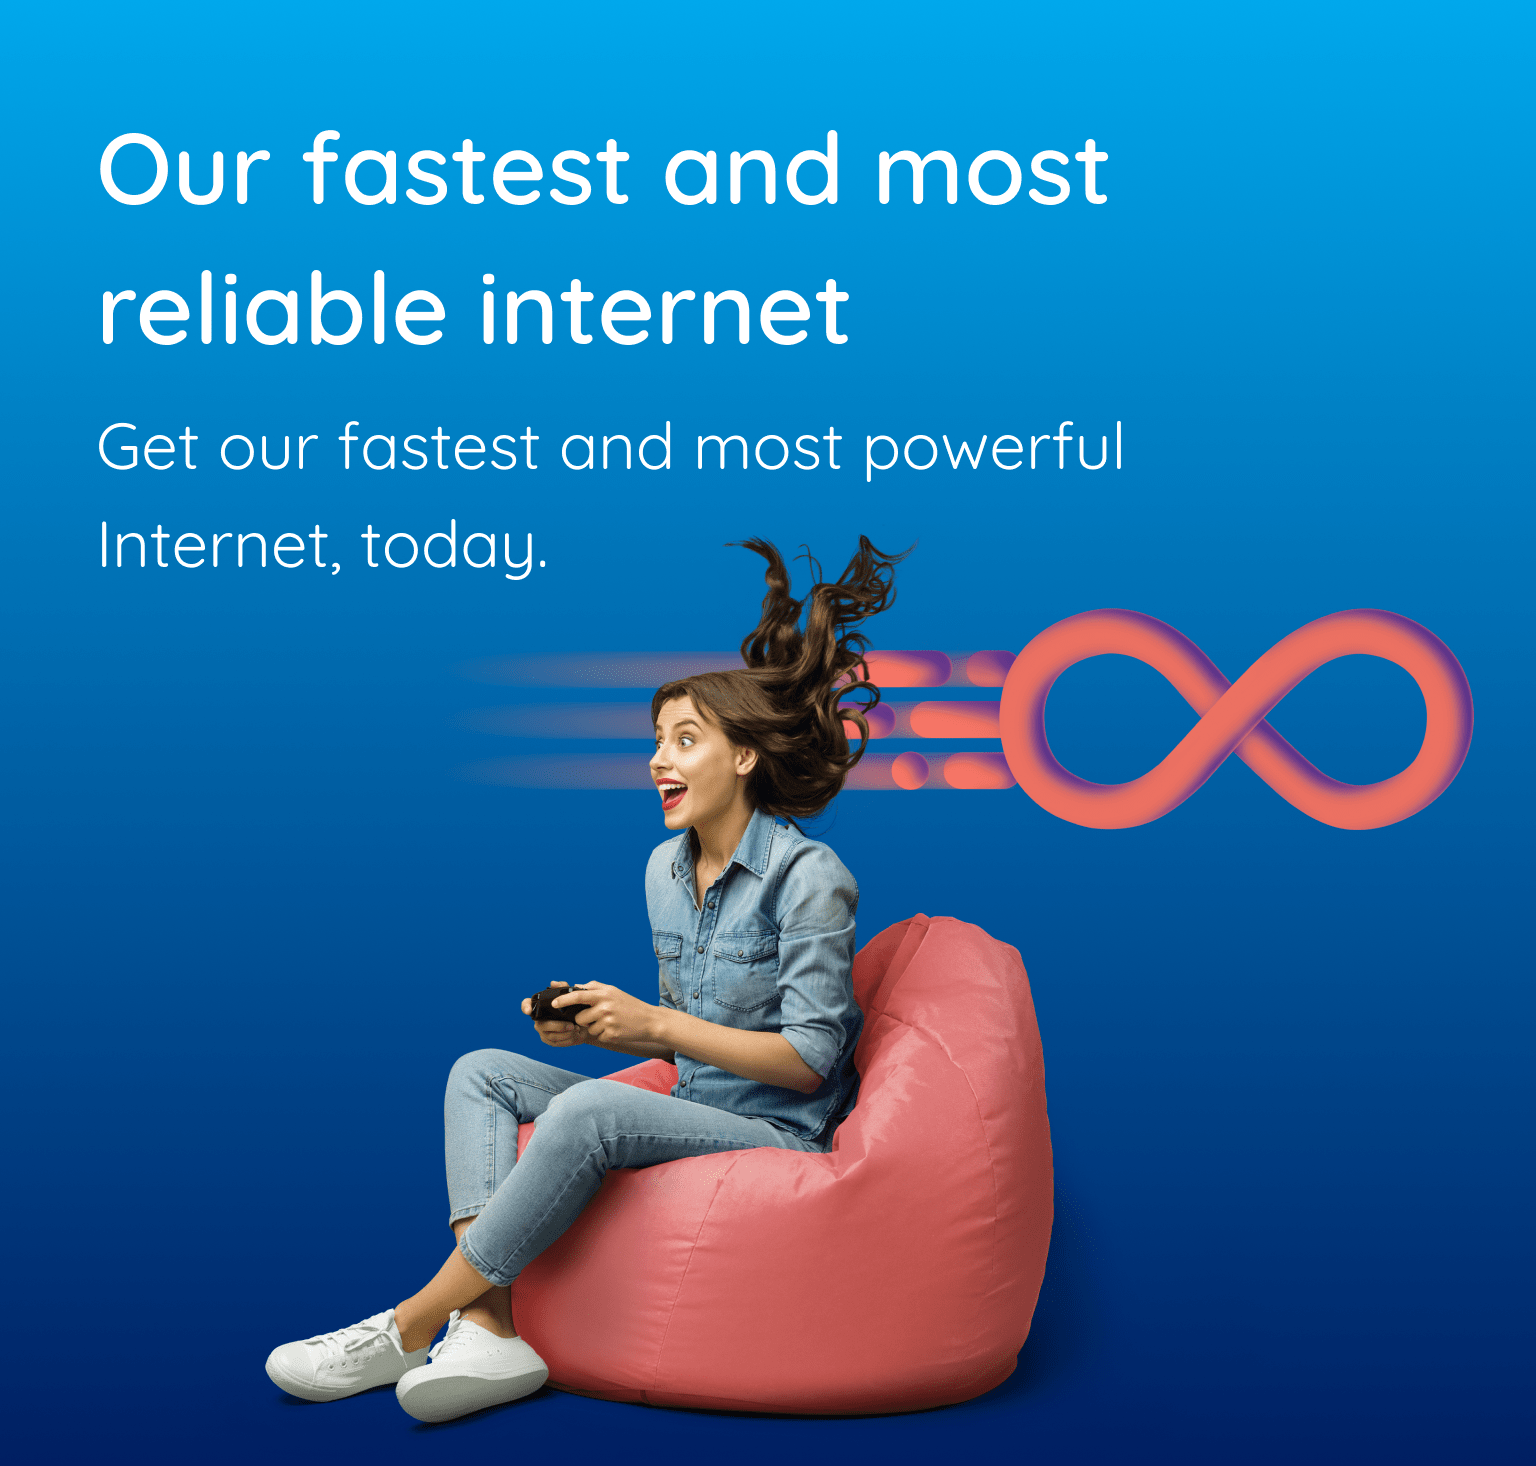 Our fastest and most reliable internet. Get our fastest and most powerful Internet, today. 